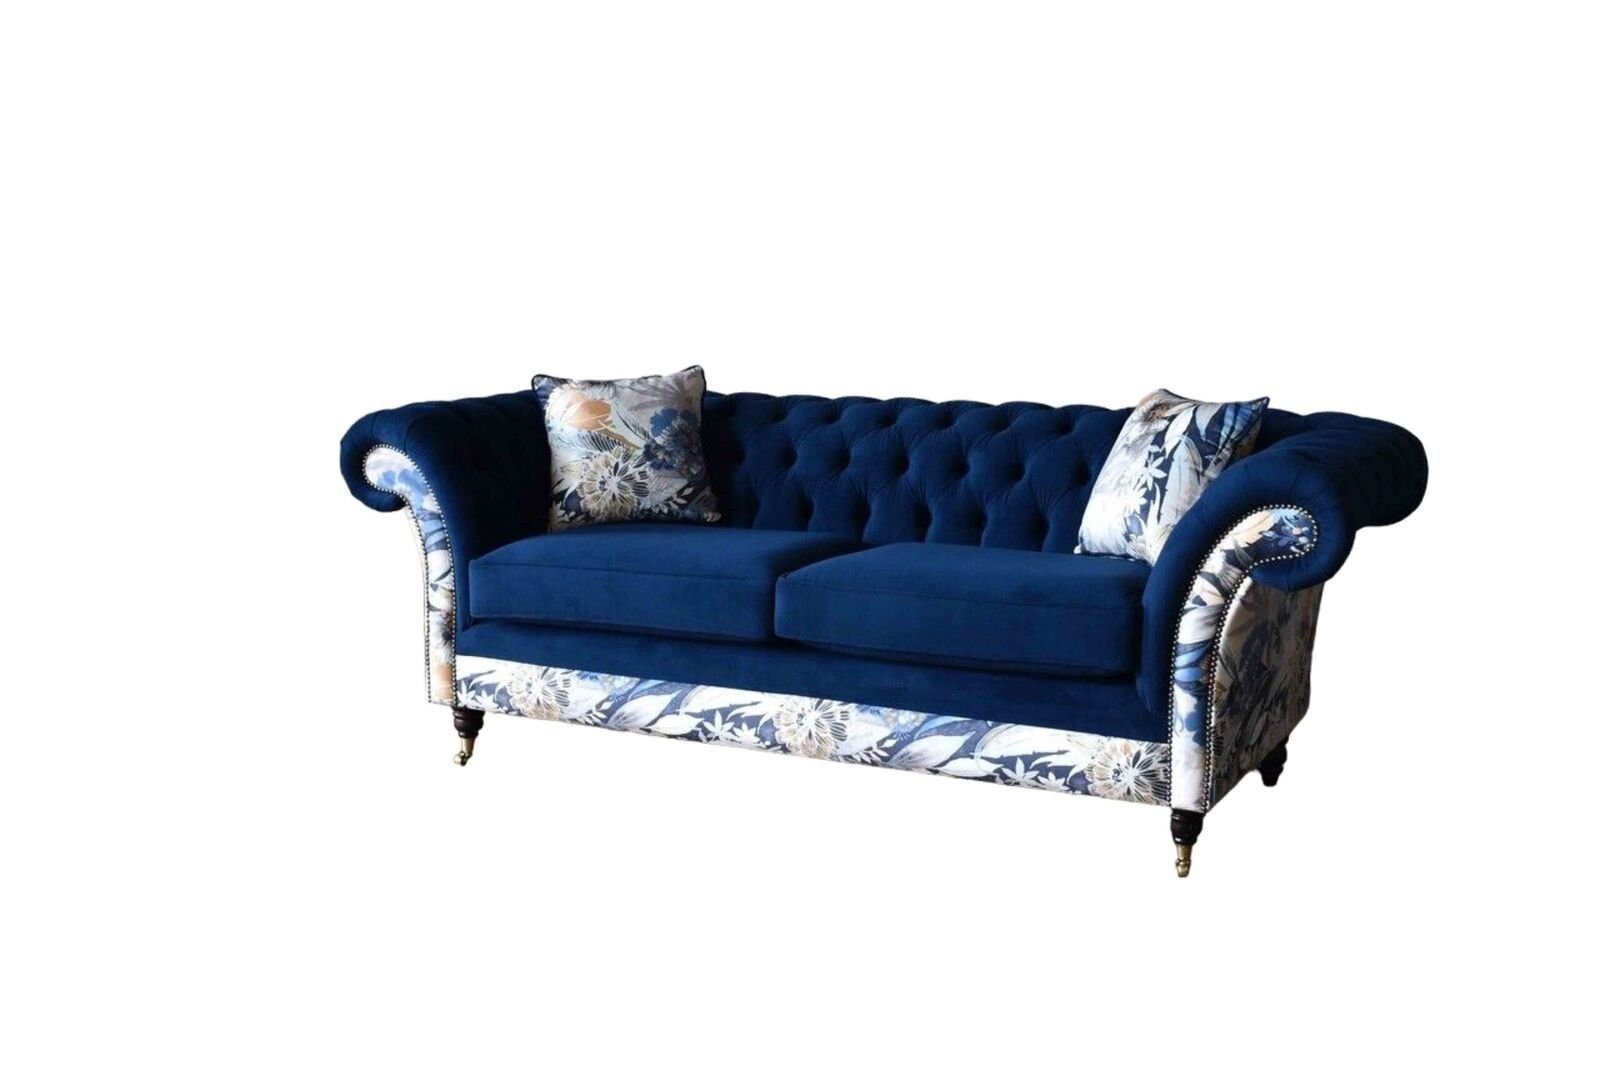 JVmoebel Polster Chesterfield Sofas, Sitz Blauer in Made Europe Sofa Royal Lounge Couch Samt